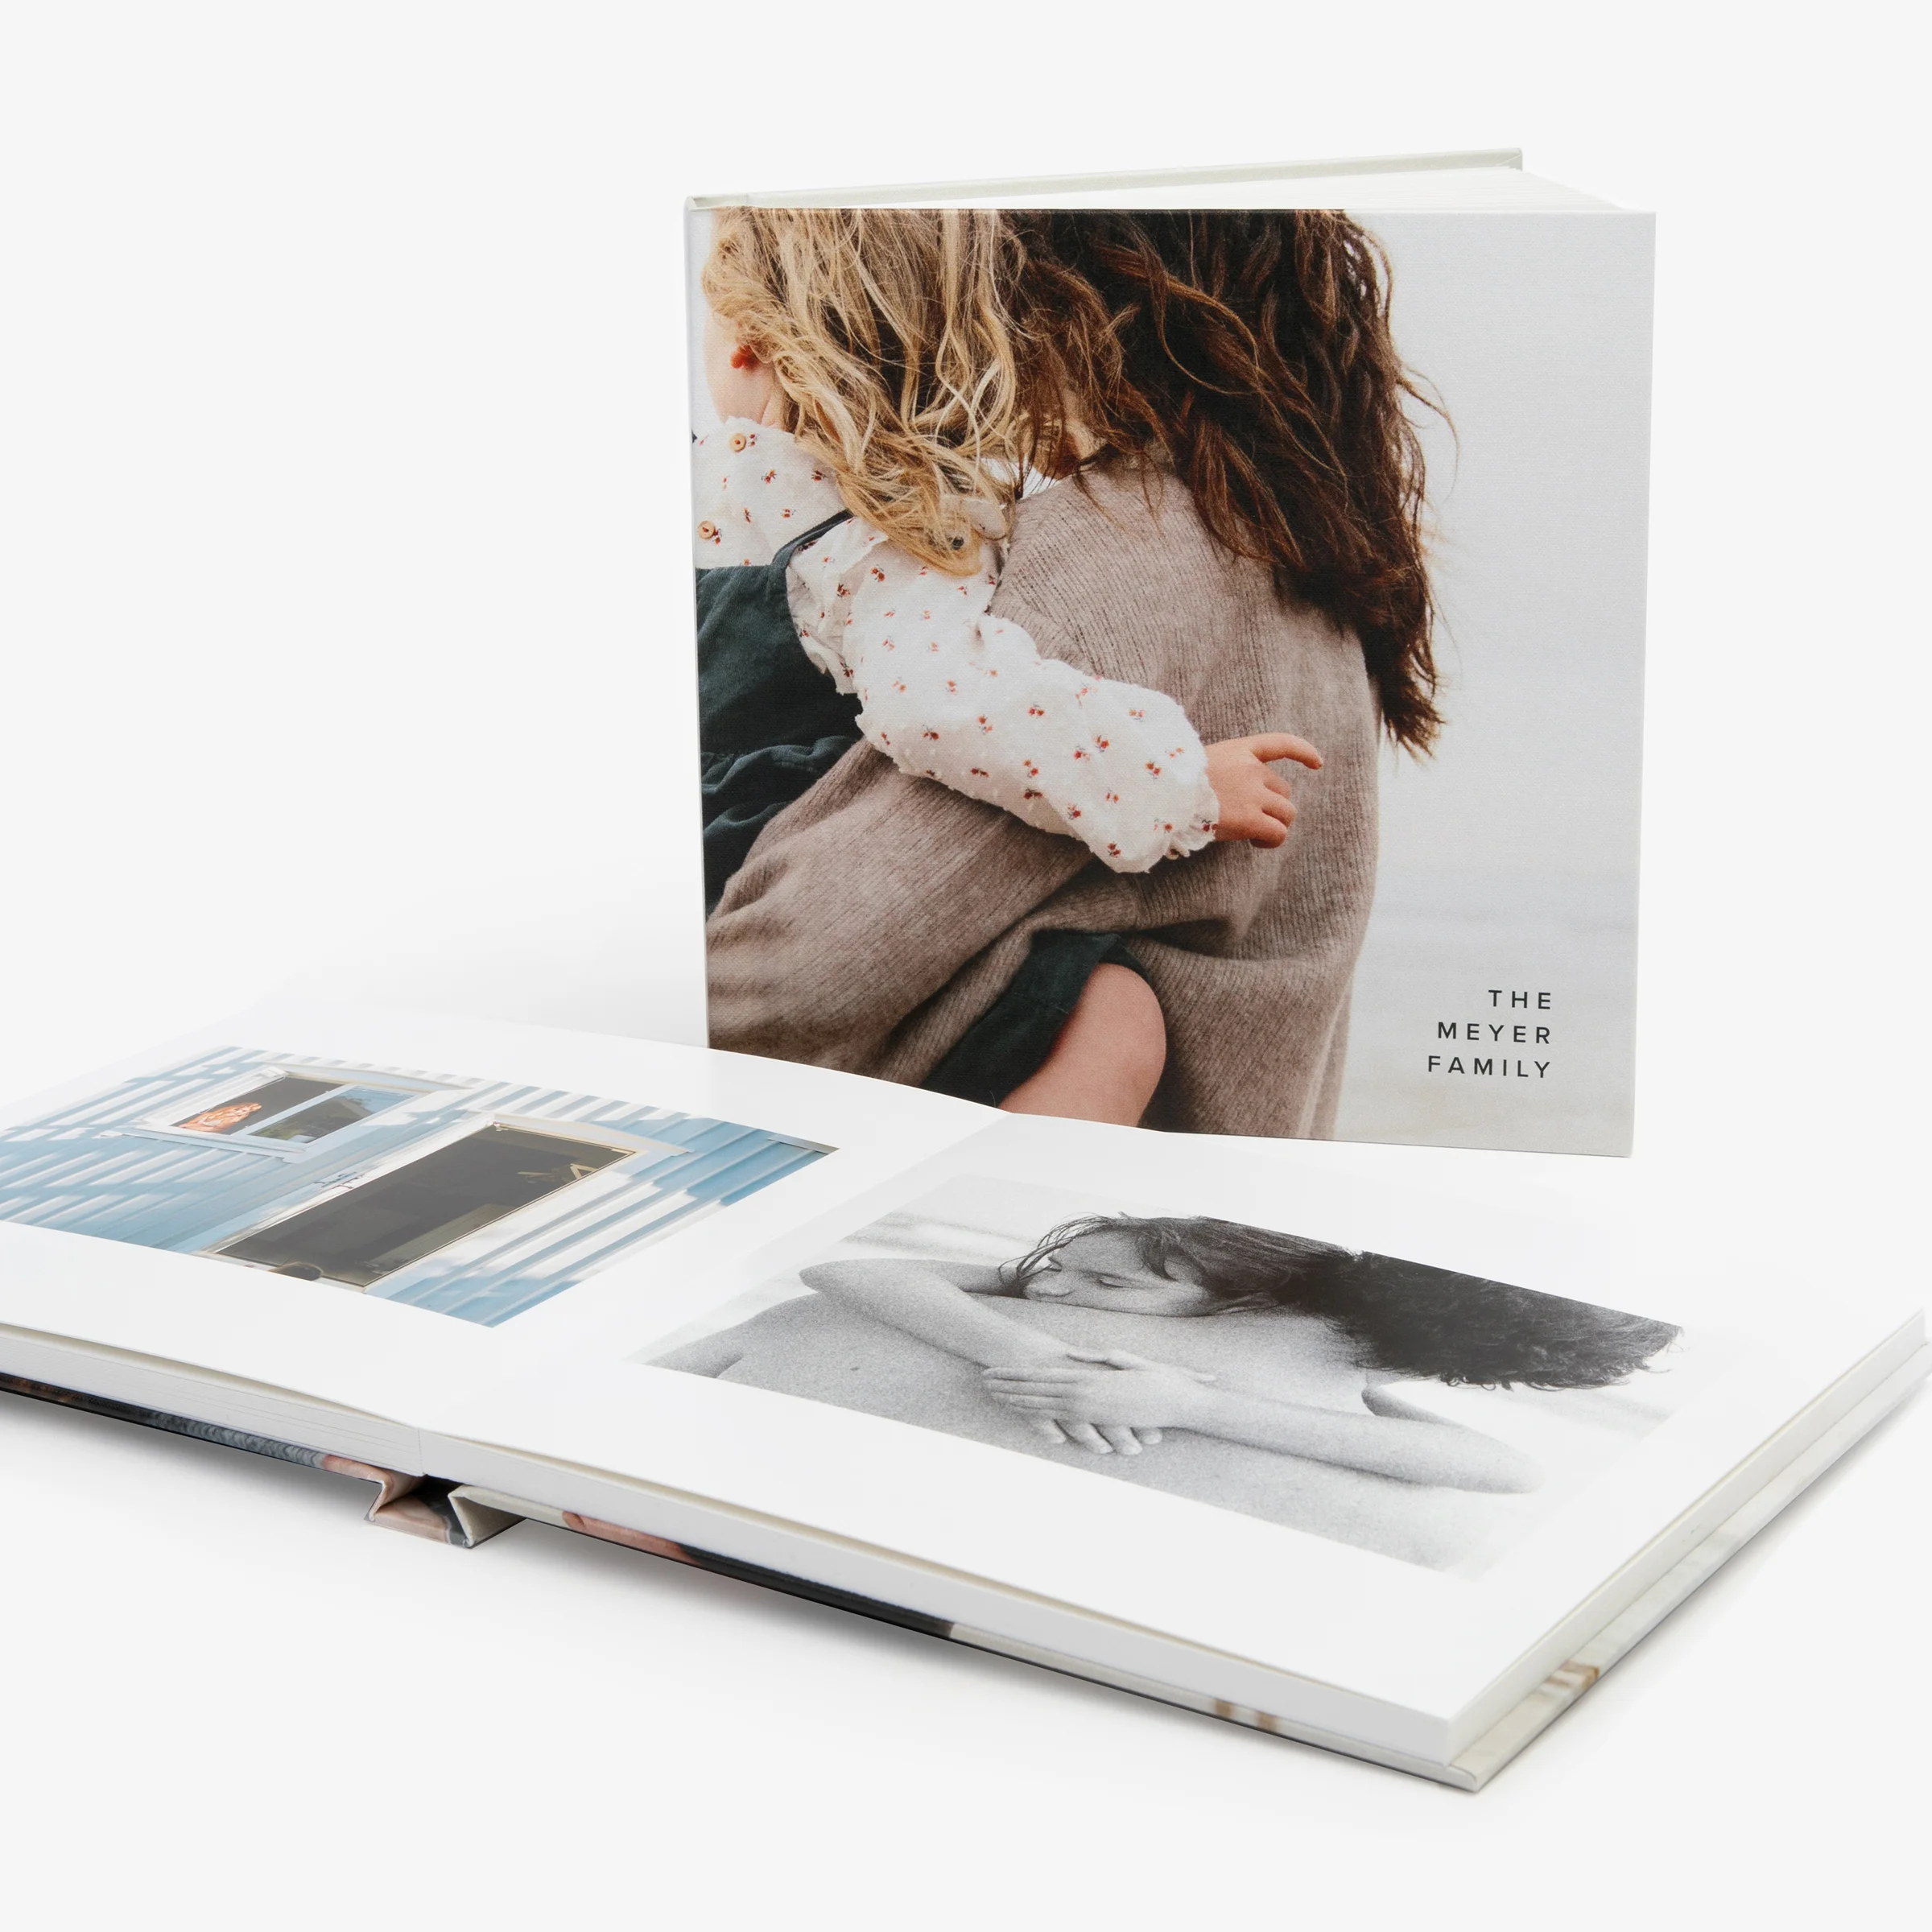 Photo-Wrapped Layflat Album featuring a panoramic image cover and unique layflat page layout